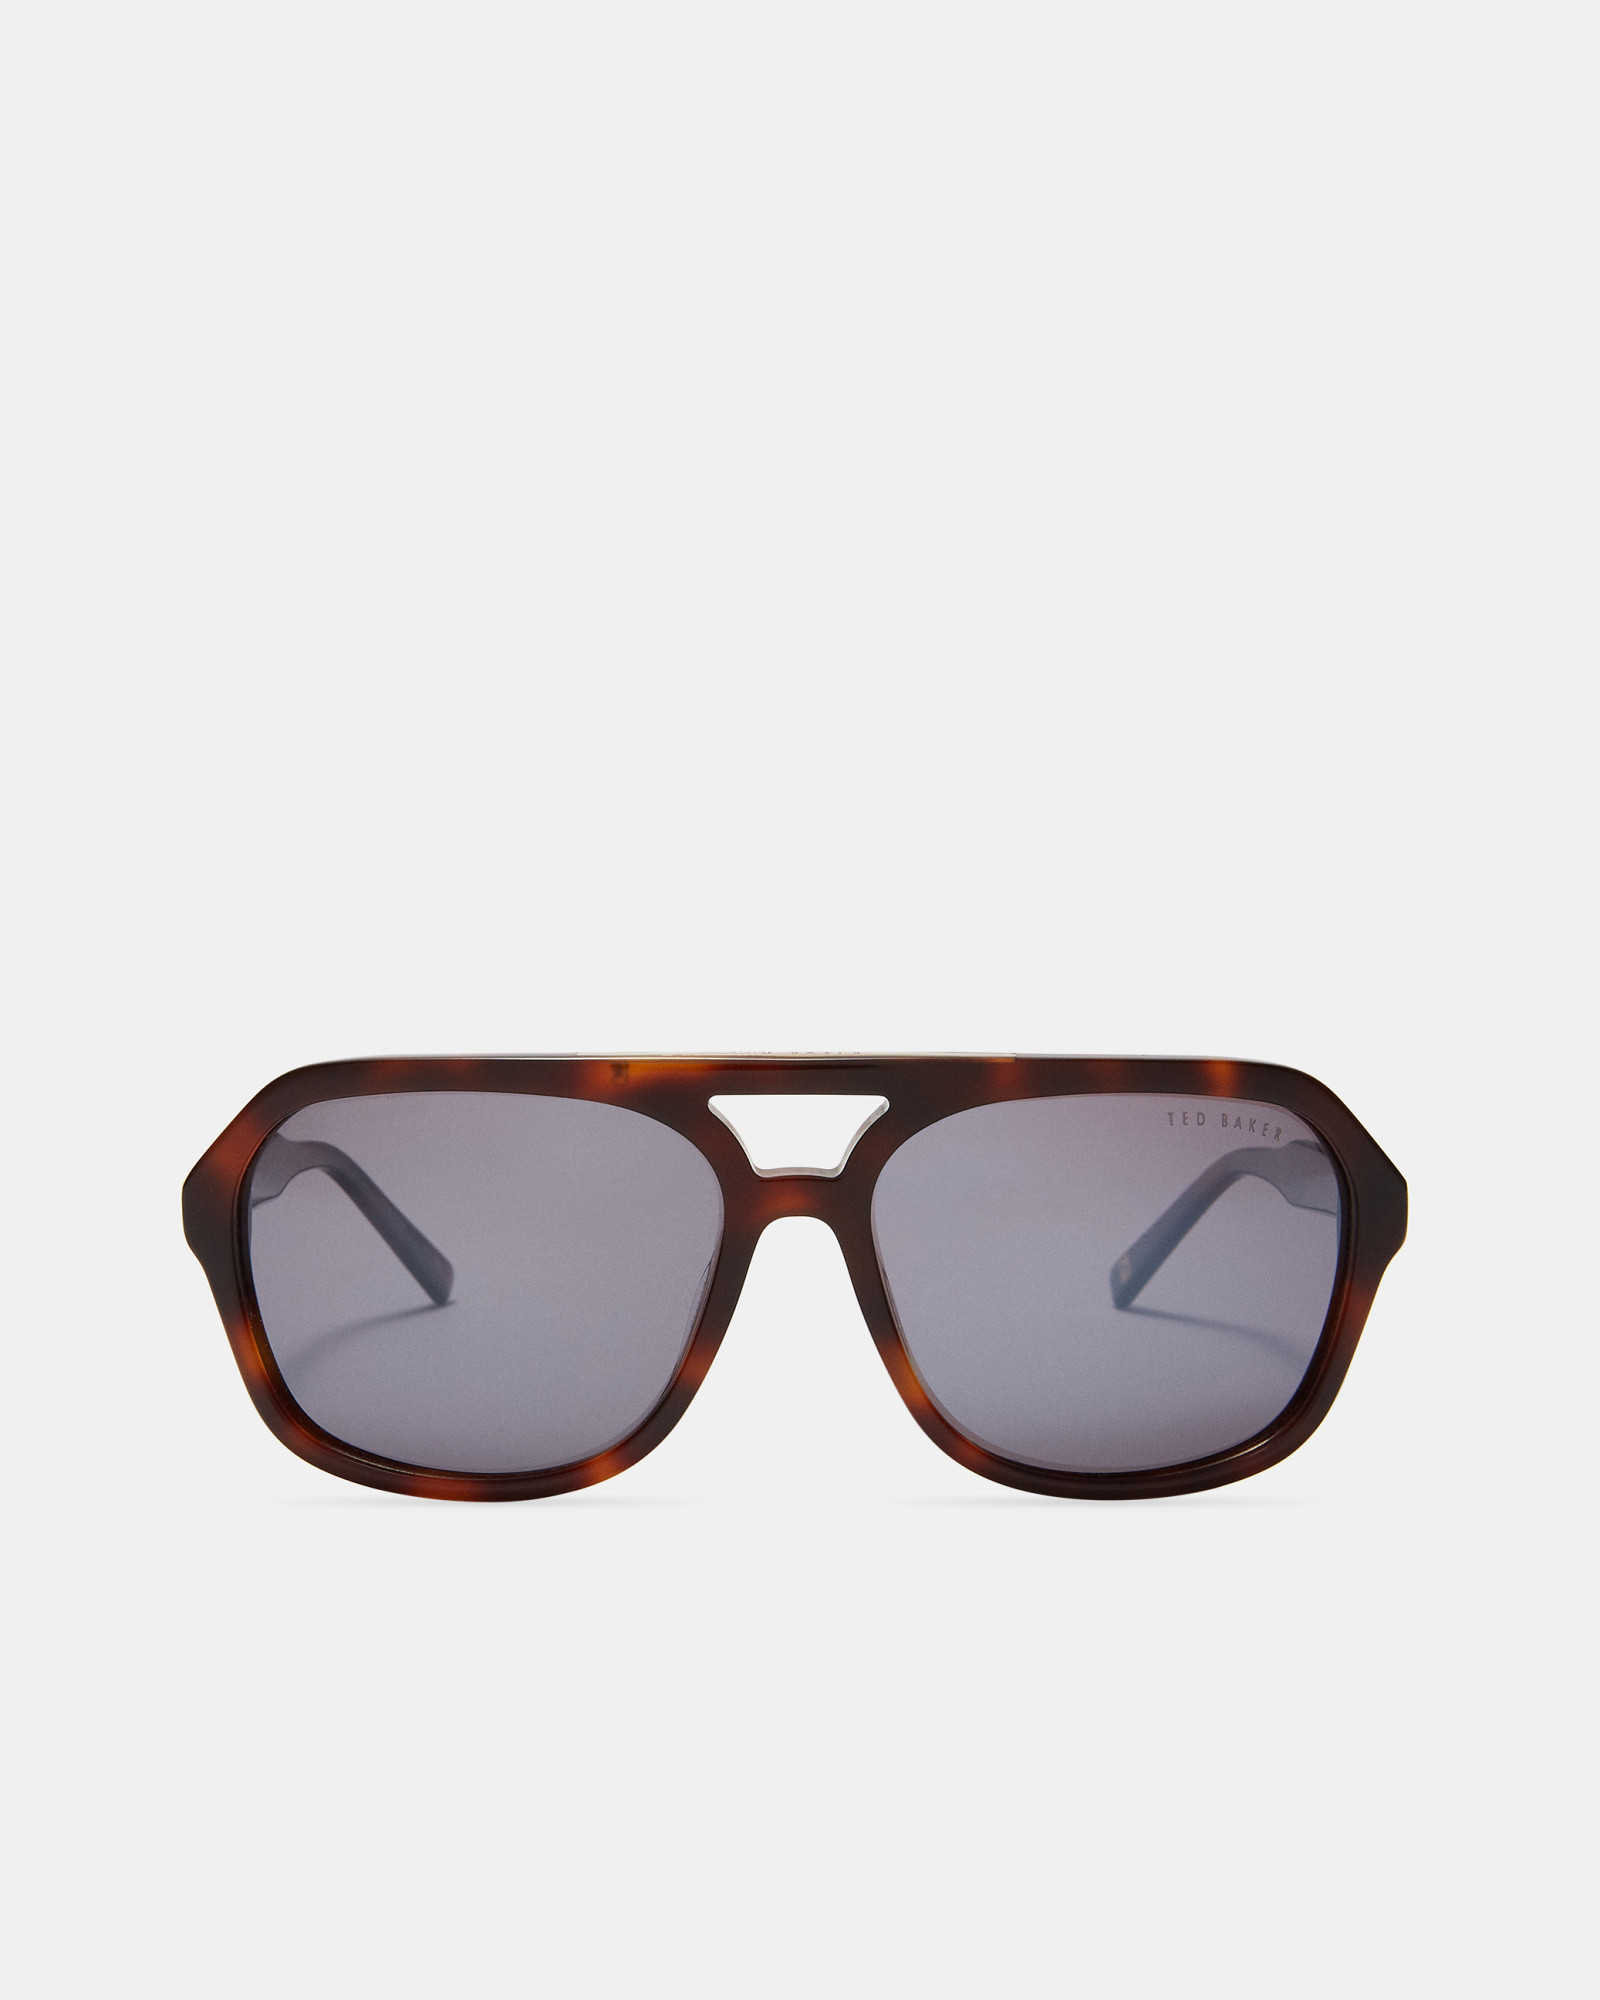 OCTOGN Brown edged sunglasses